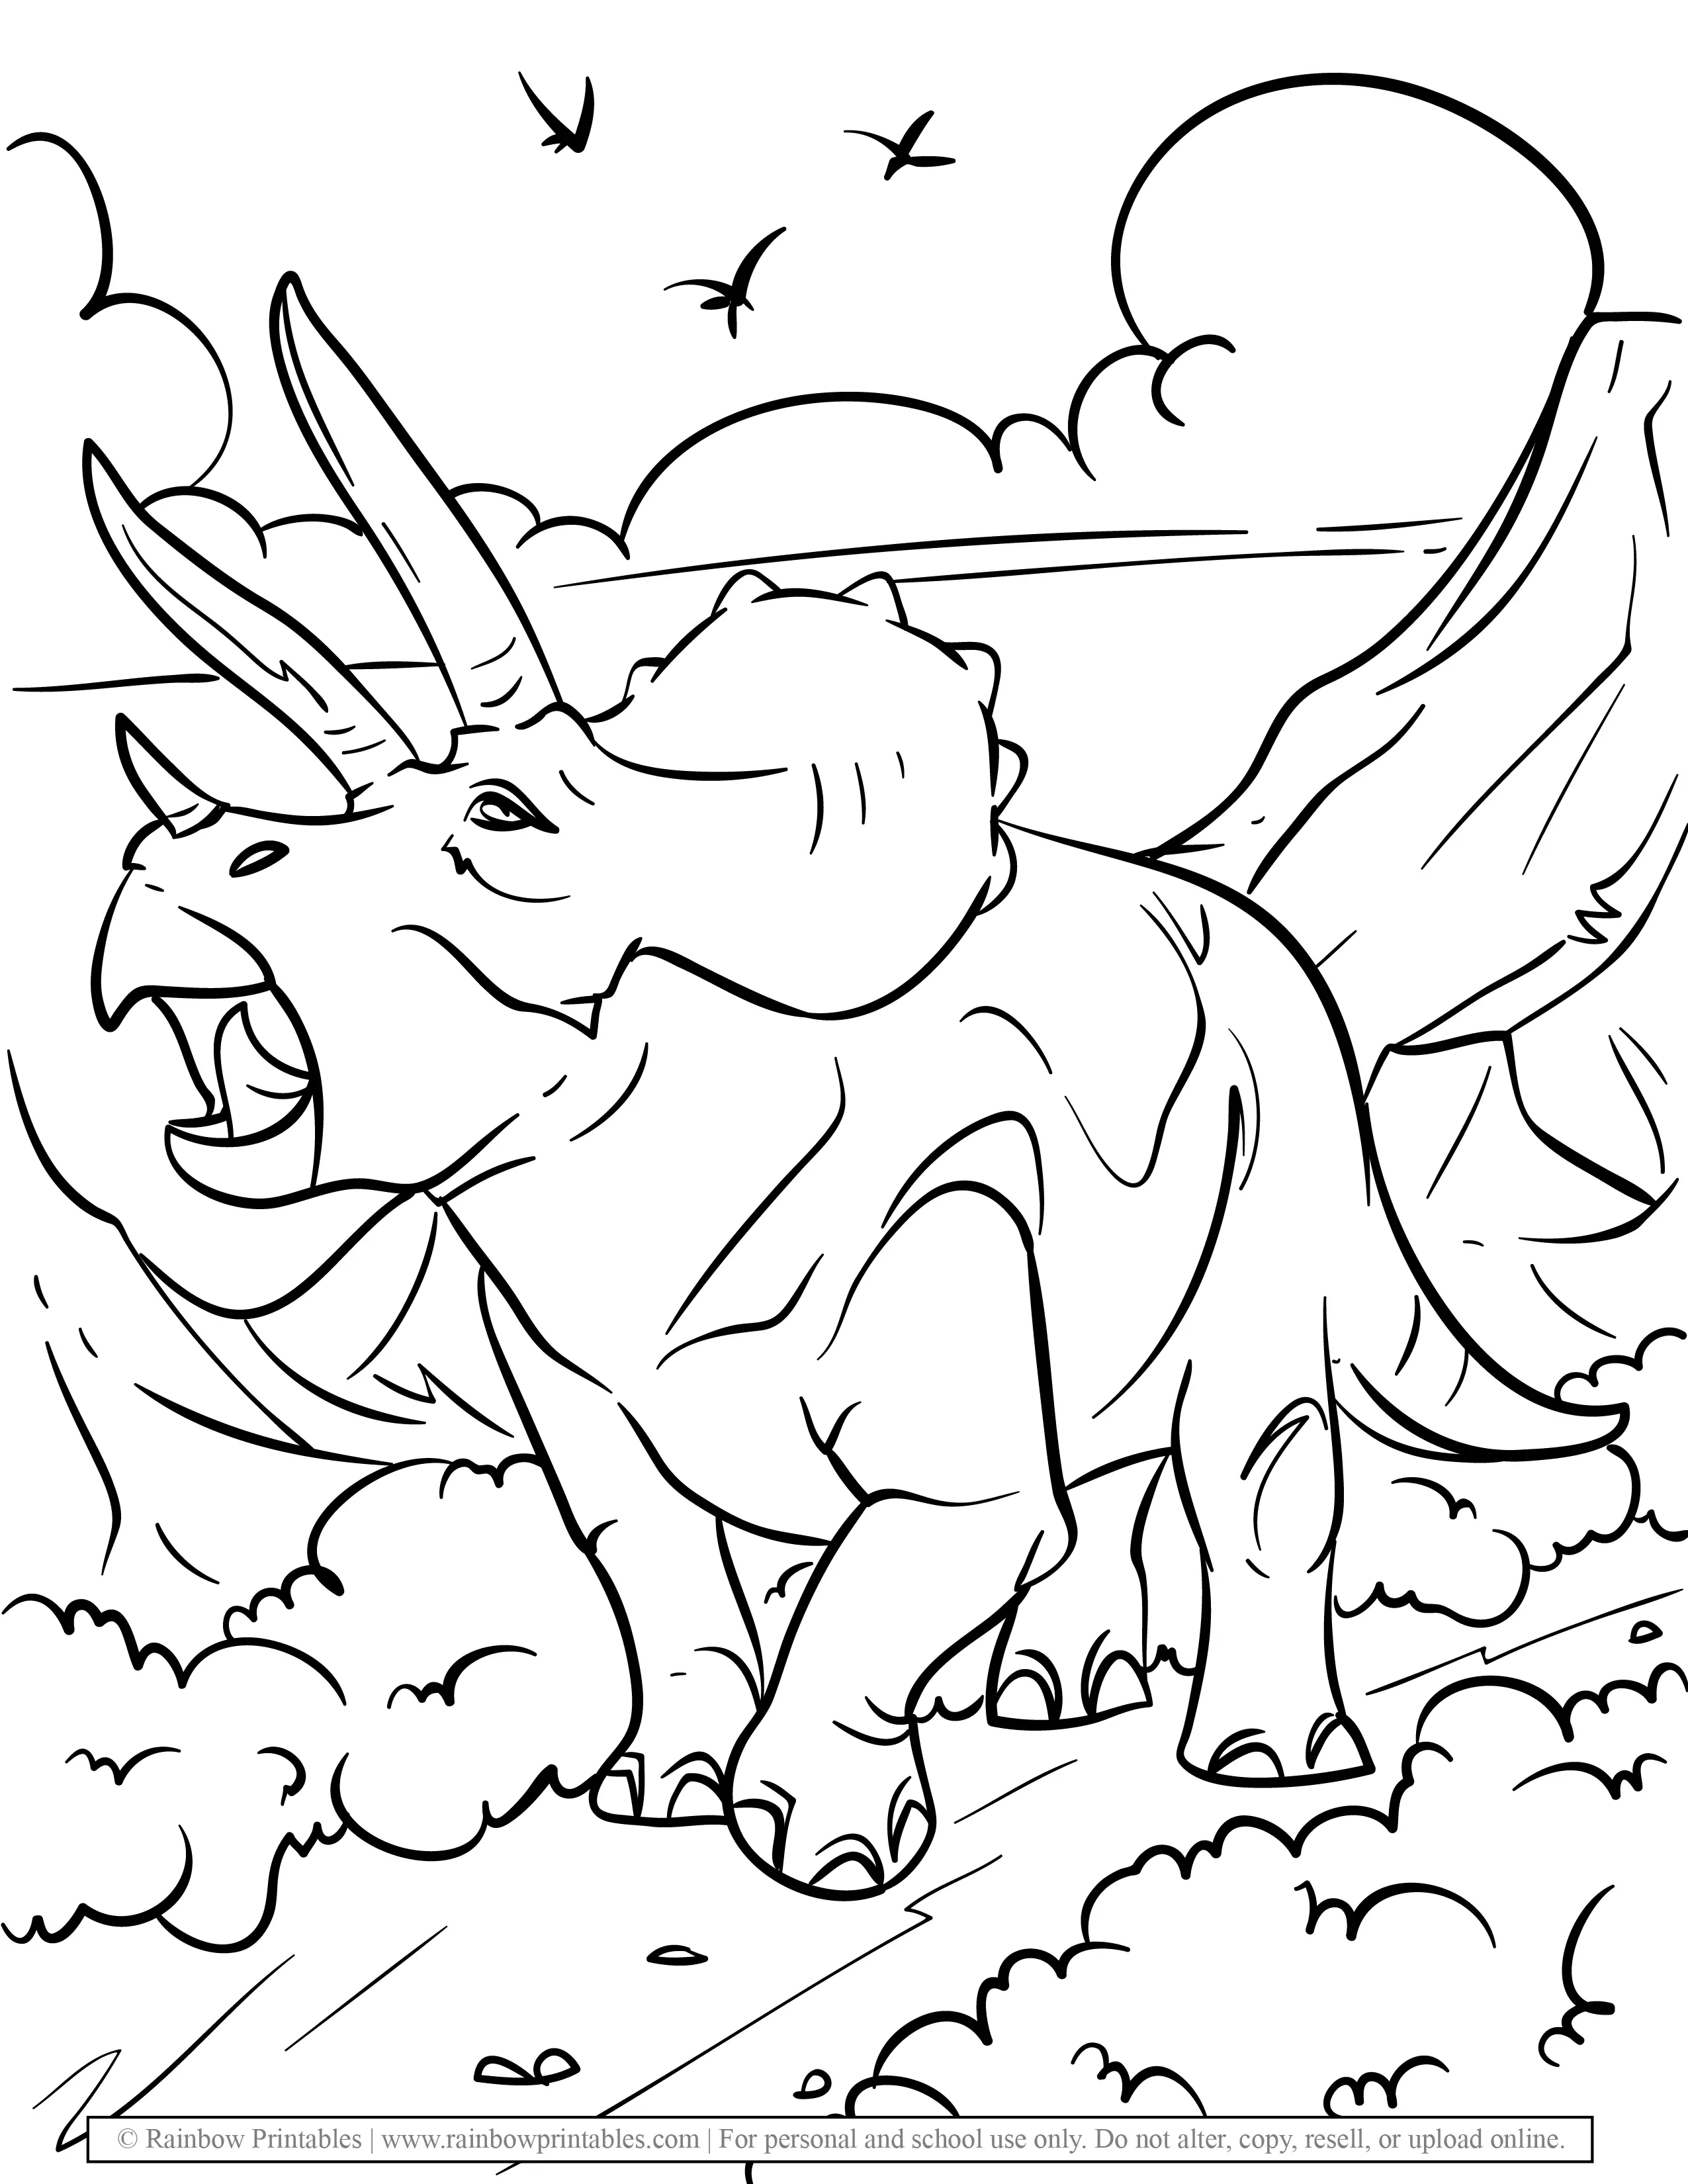 Cute Animals Ceratopsian Dinosaur Landscape Extinct Animals Coloring Page for Kids